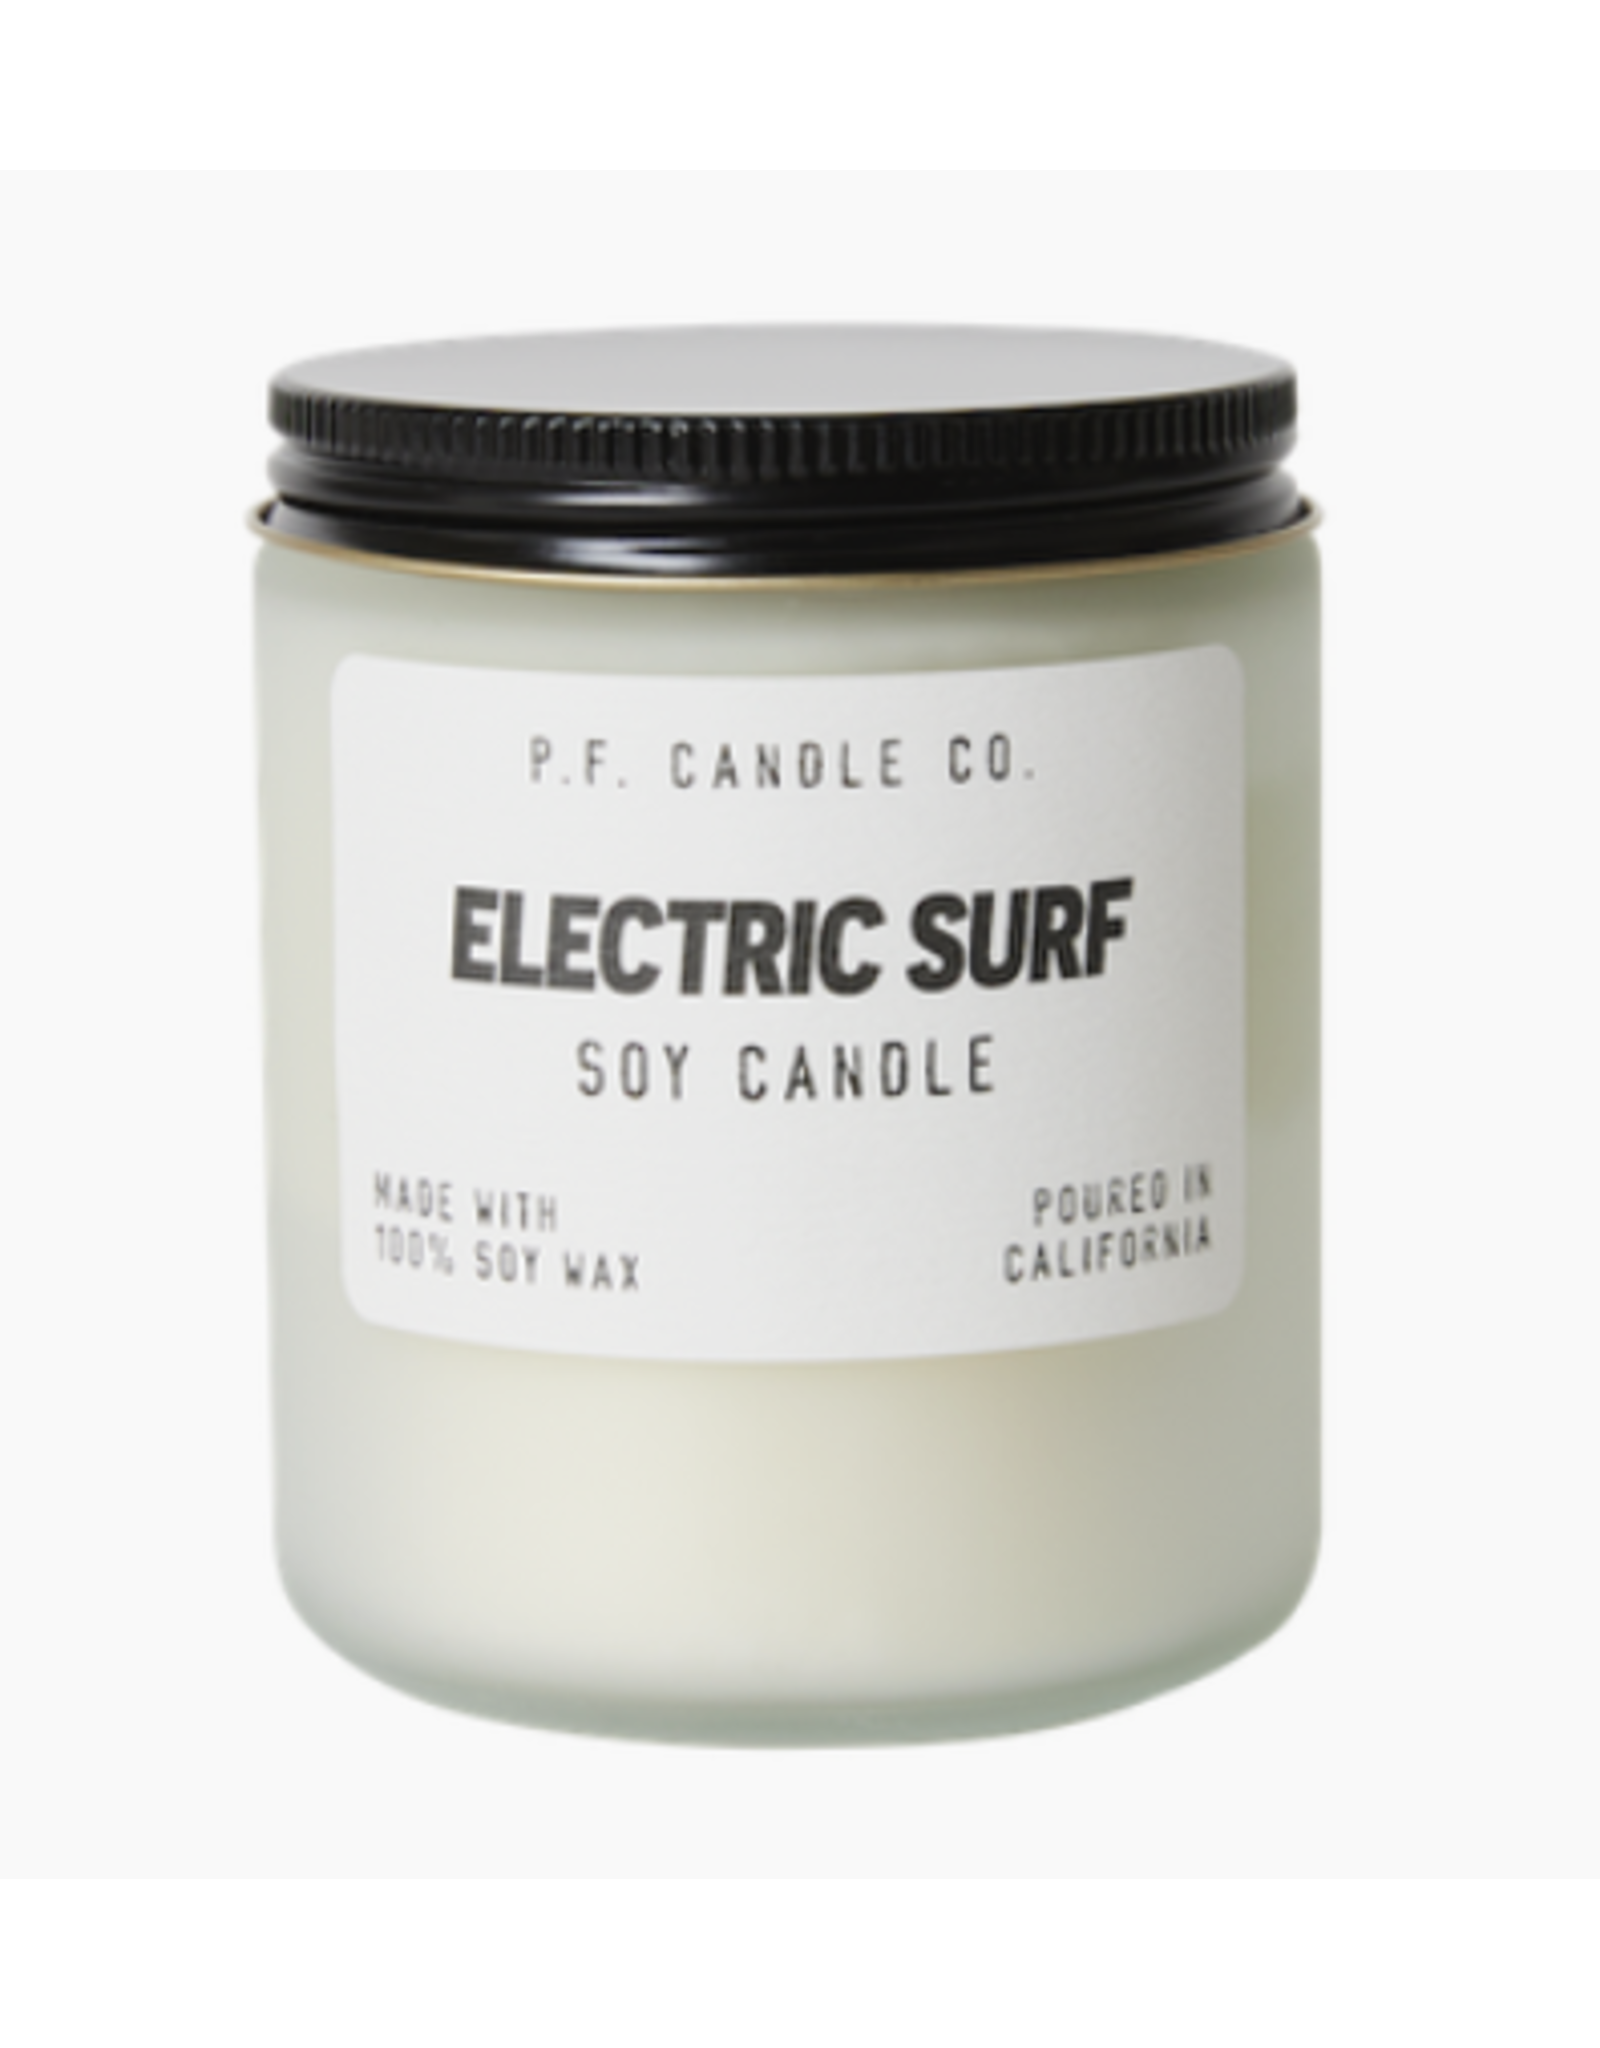 7.2 oz Soy Candle - Electric Surf